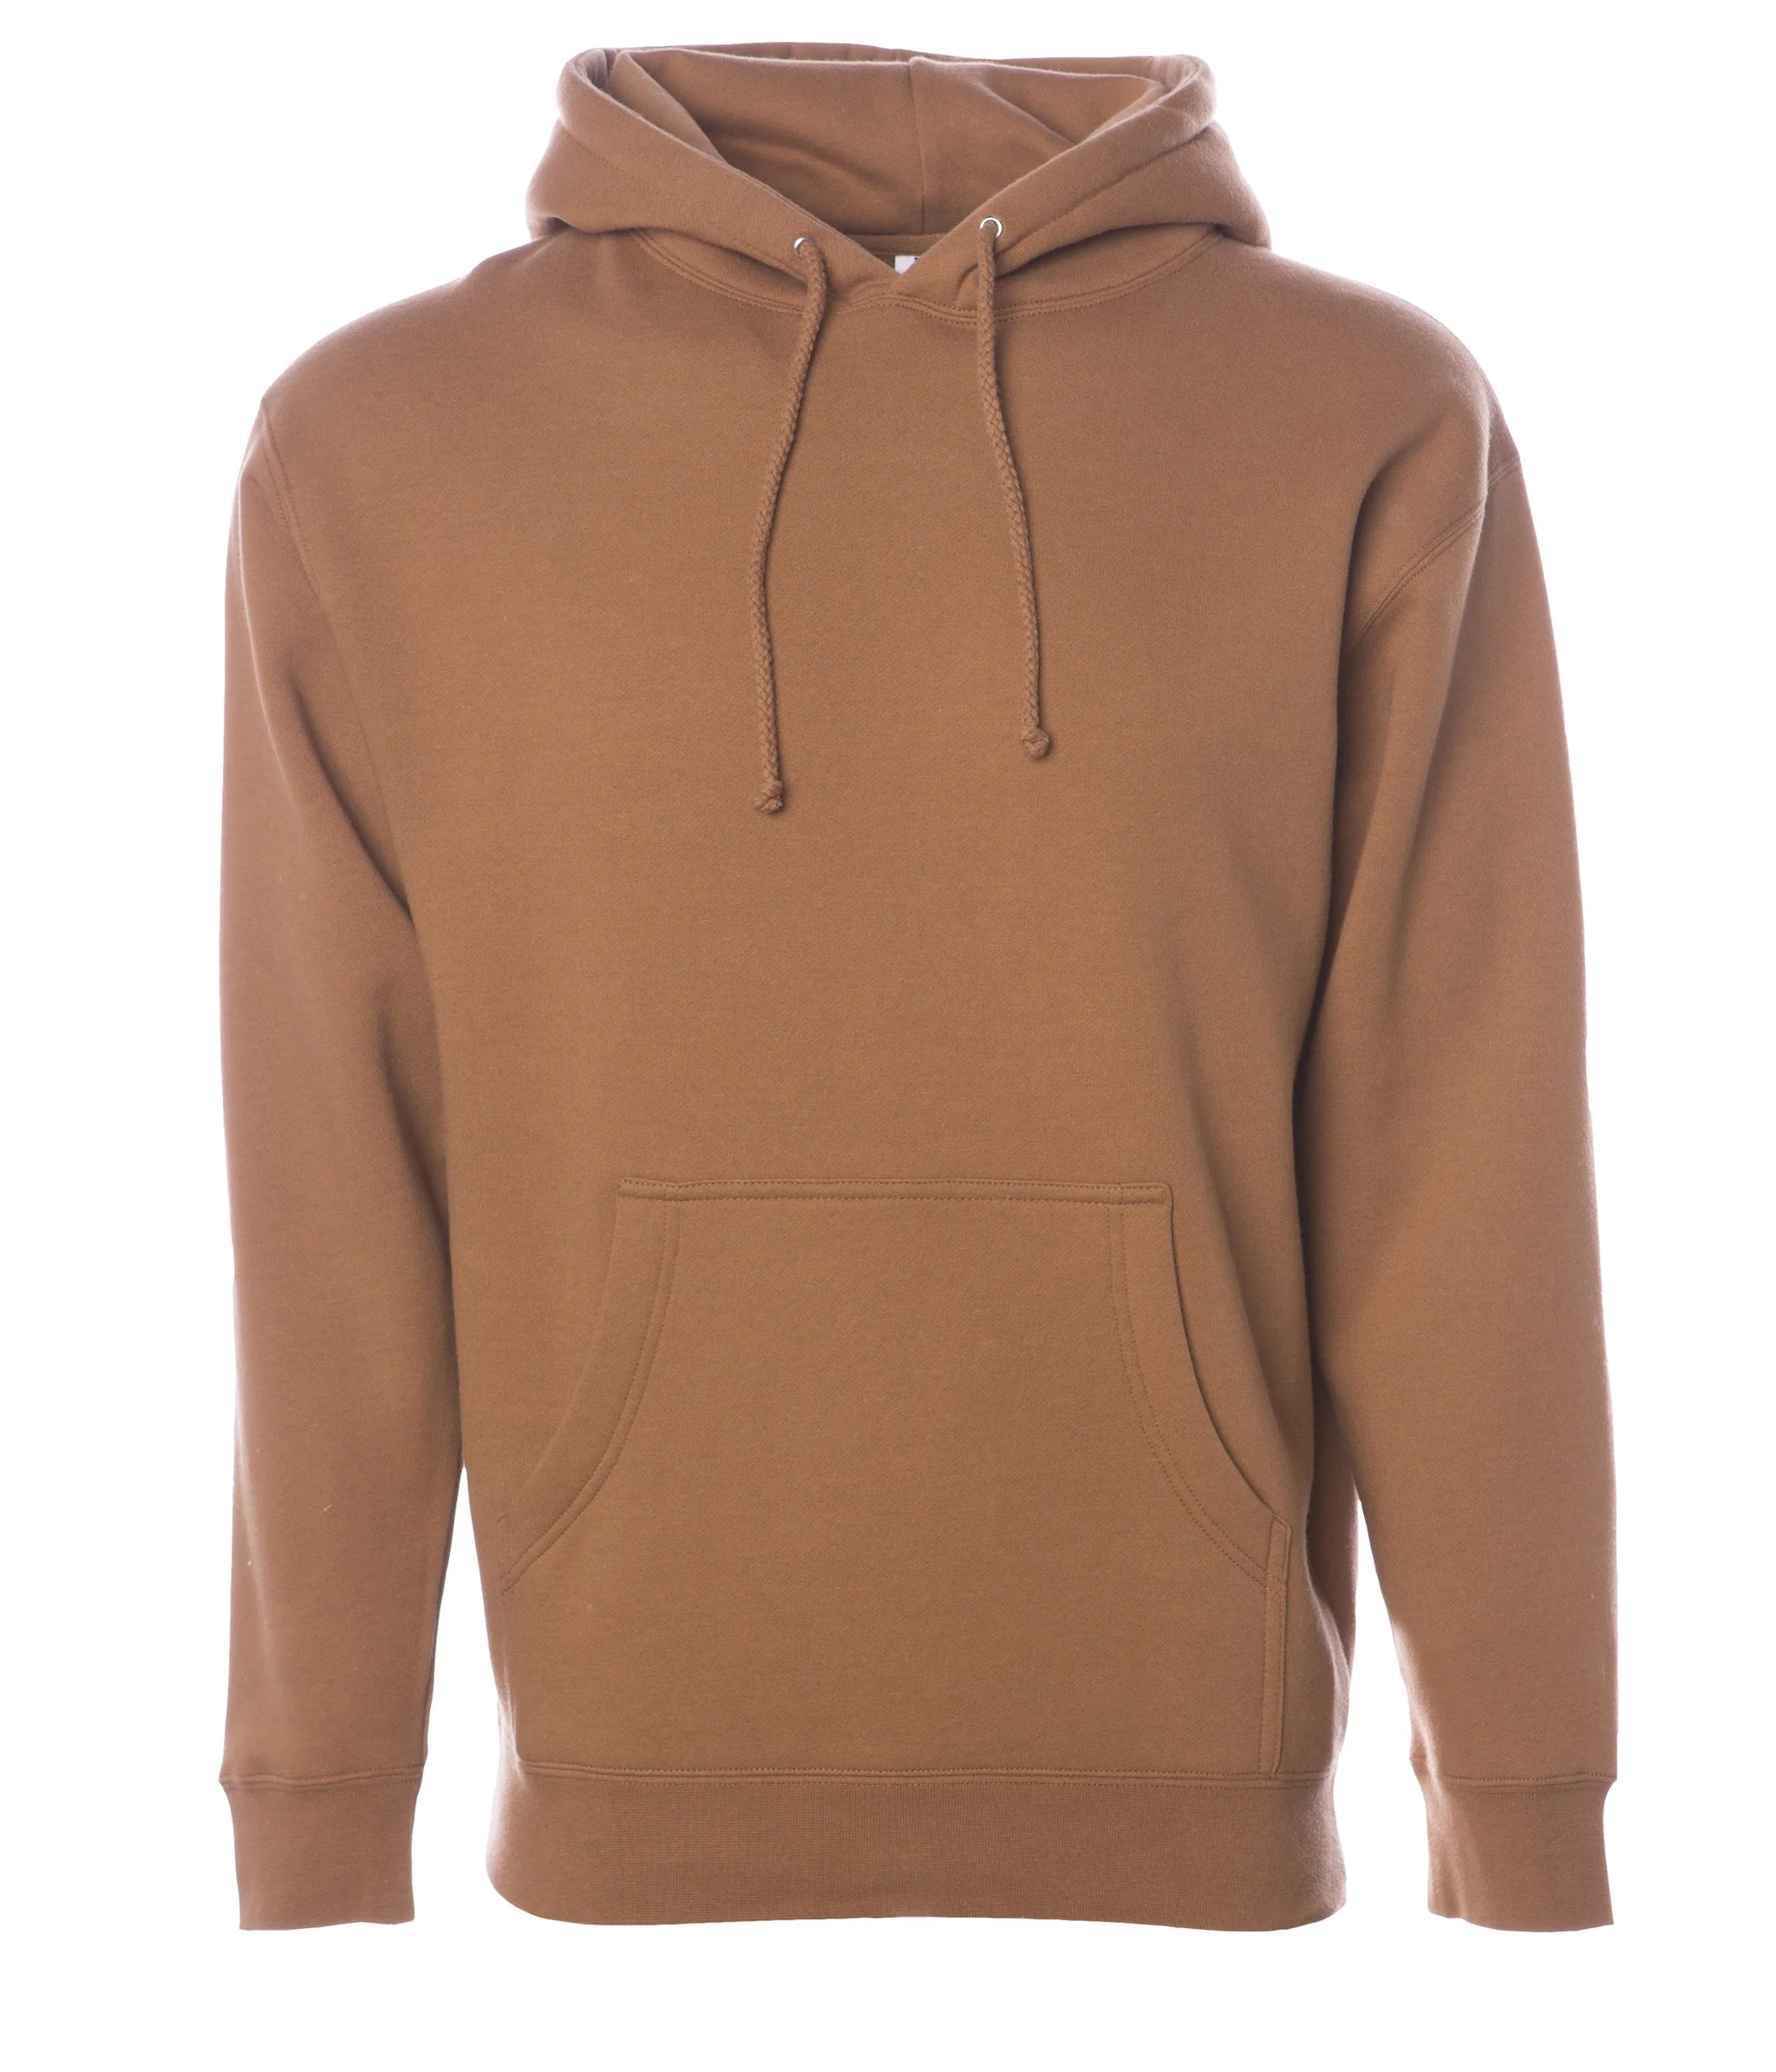 A plain brown hoodie with a front pouch pocket and drawstrings, isolated on a white background.